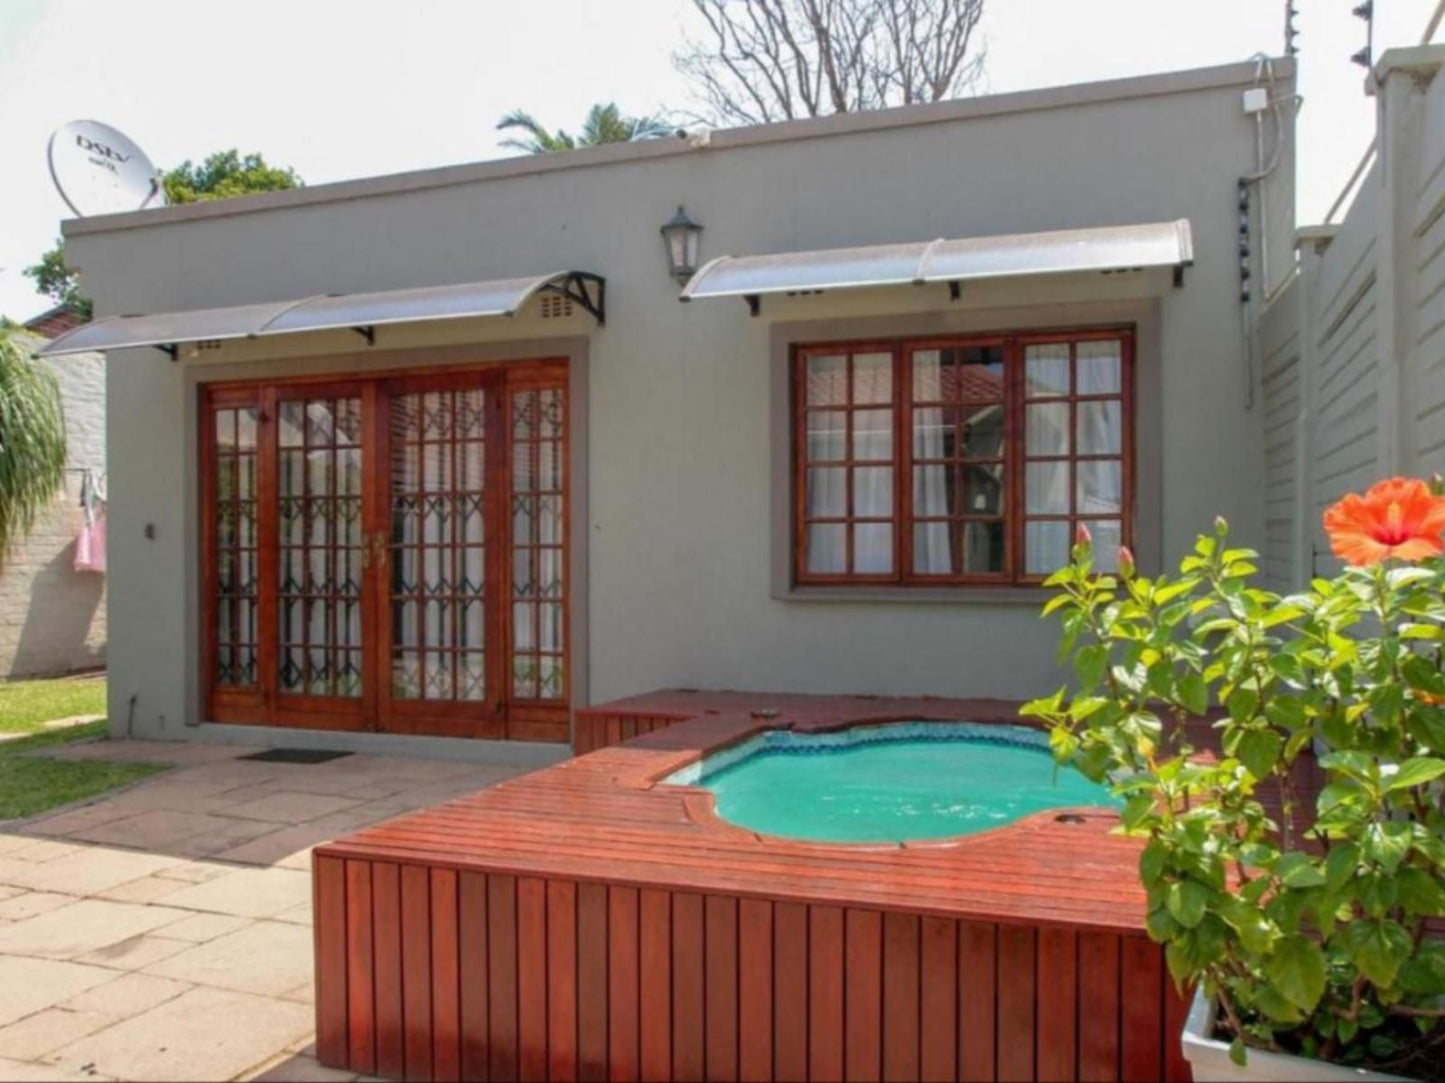 Beechwood Guesthouse Bulwer Durban Durban Kwazulu Natal South Africa House, Building, Architecture, Swimming Pool